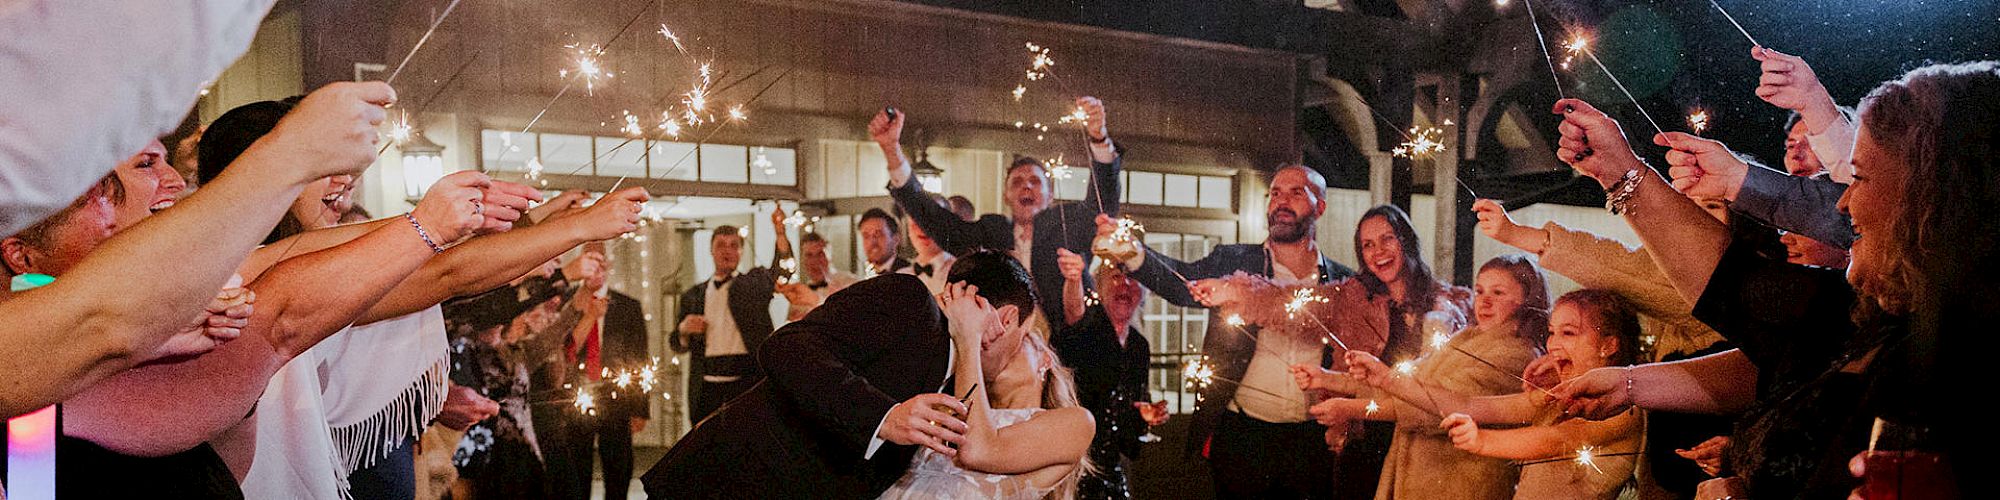 A couple sharing a kiss in the center, surrounded by people holding sparklers, likely celebrating a wedding or similar event, at night.